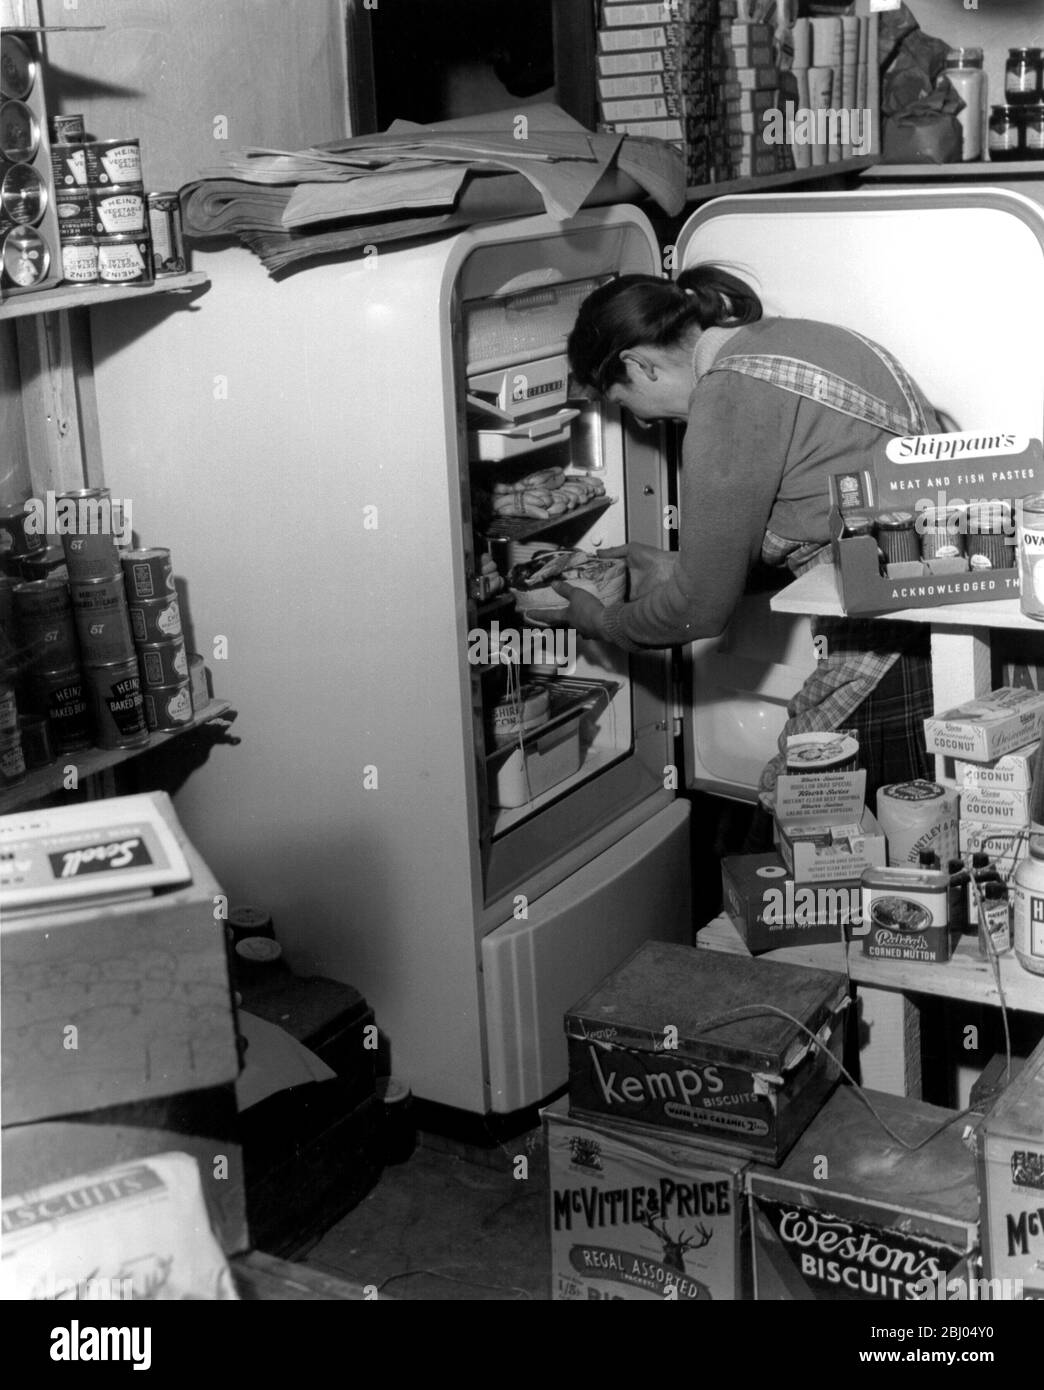 Britain's loneliest island - Inside the village shop, with Mrs A Till taking out some merchandise from the island's only refrigerator - it works by parafin. - July 22nd 1957 Stock Photo